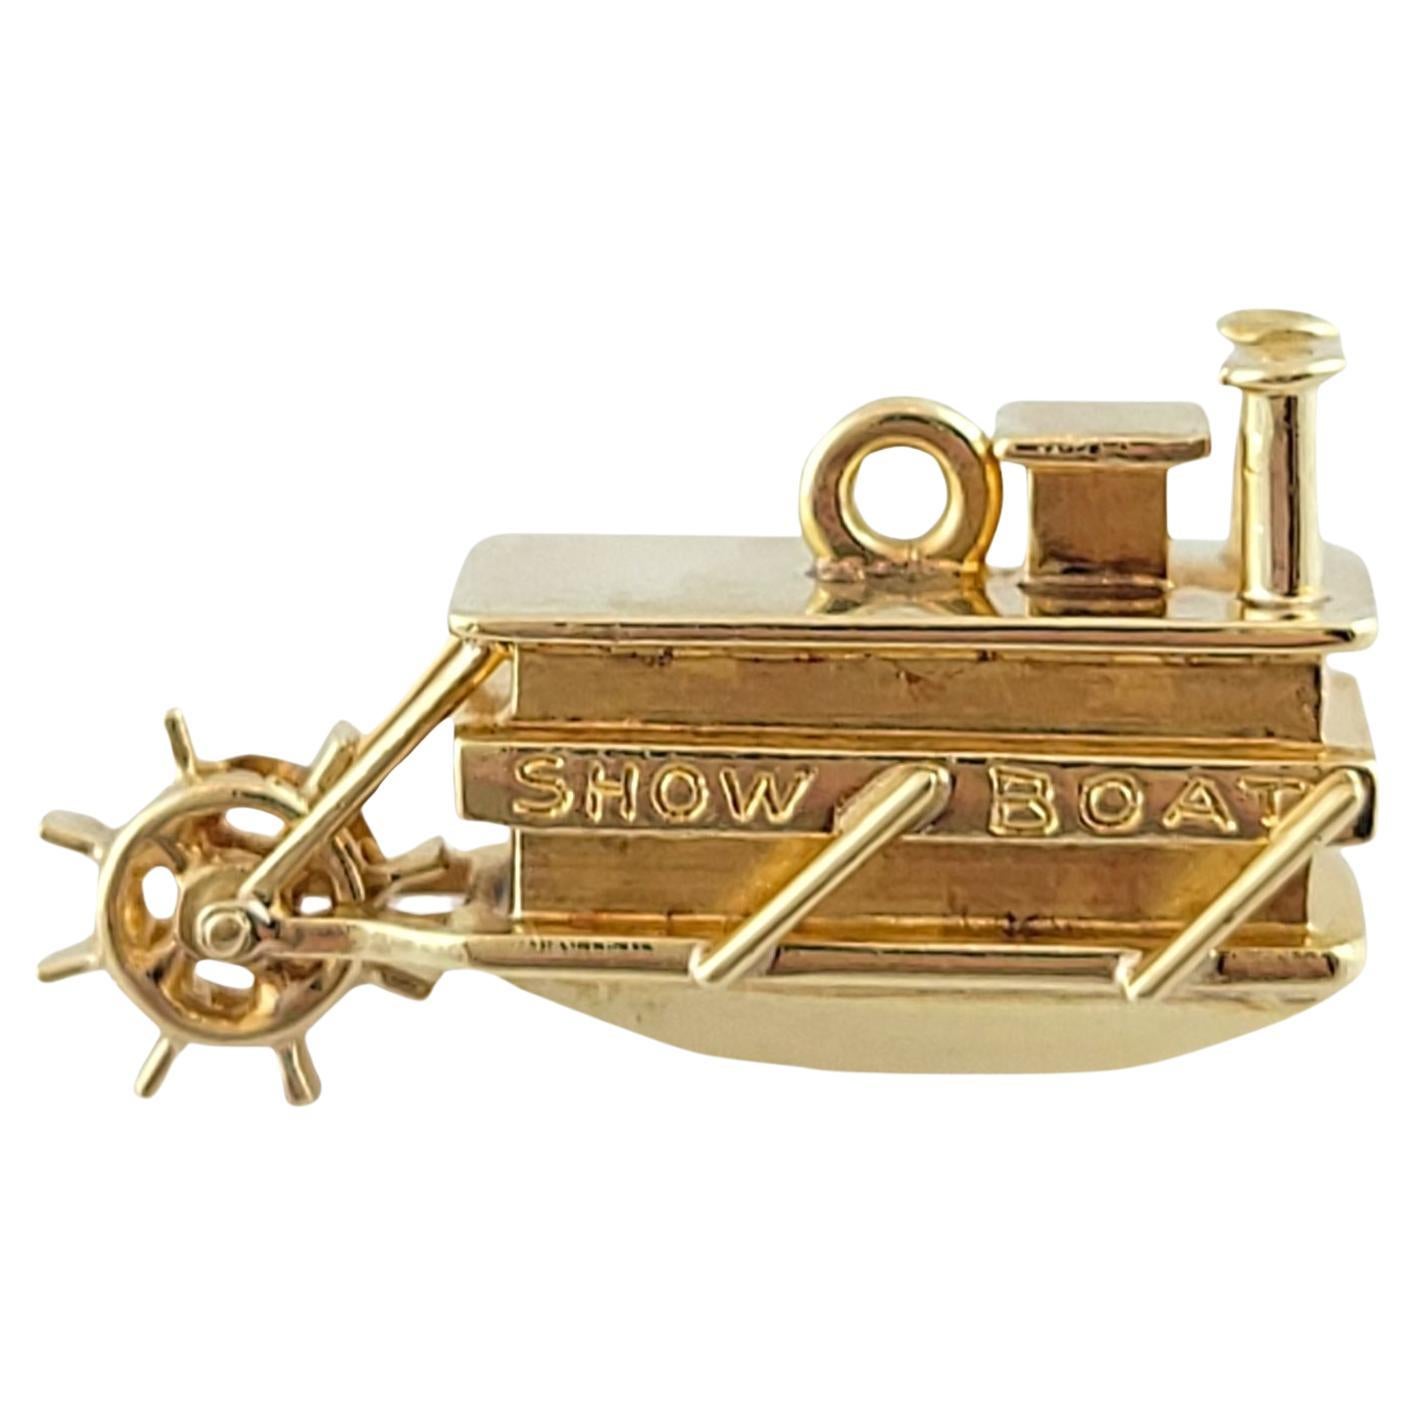  14K Yellow Gold Show Boat Charm #14803